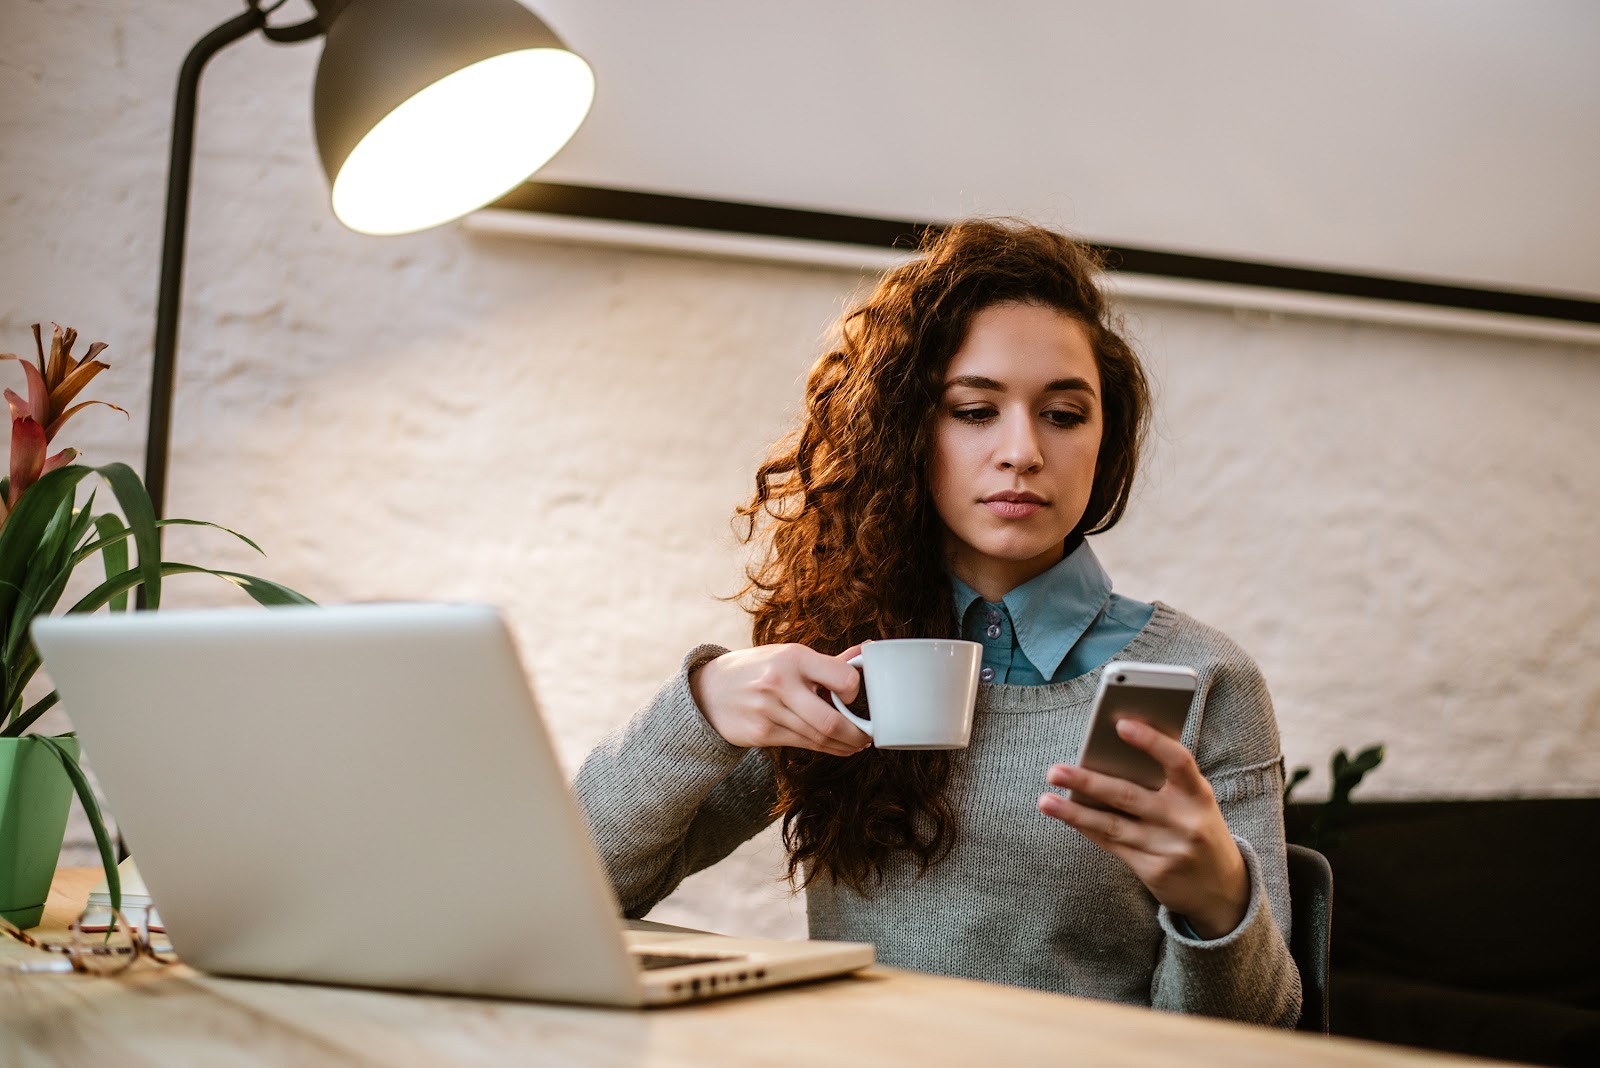 Young woman drinking coffee at her desk while looking at her smartphone